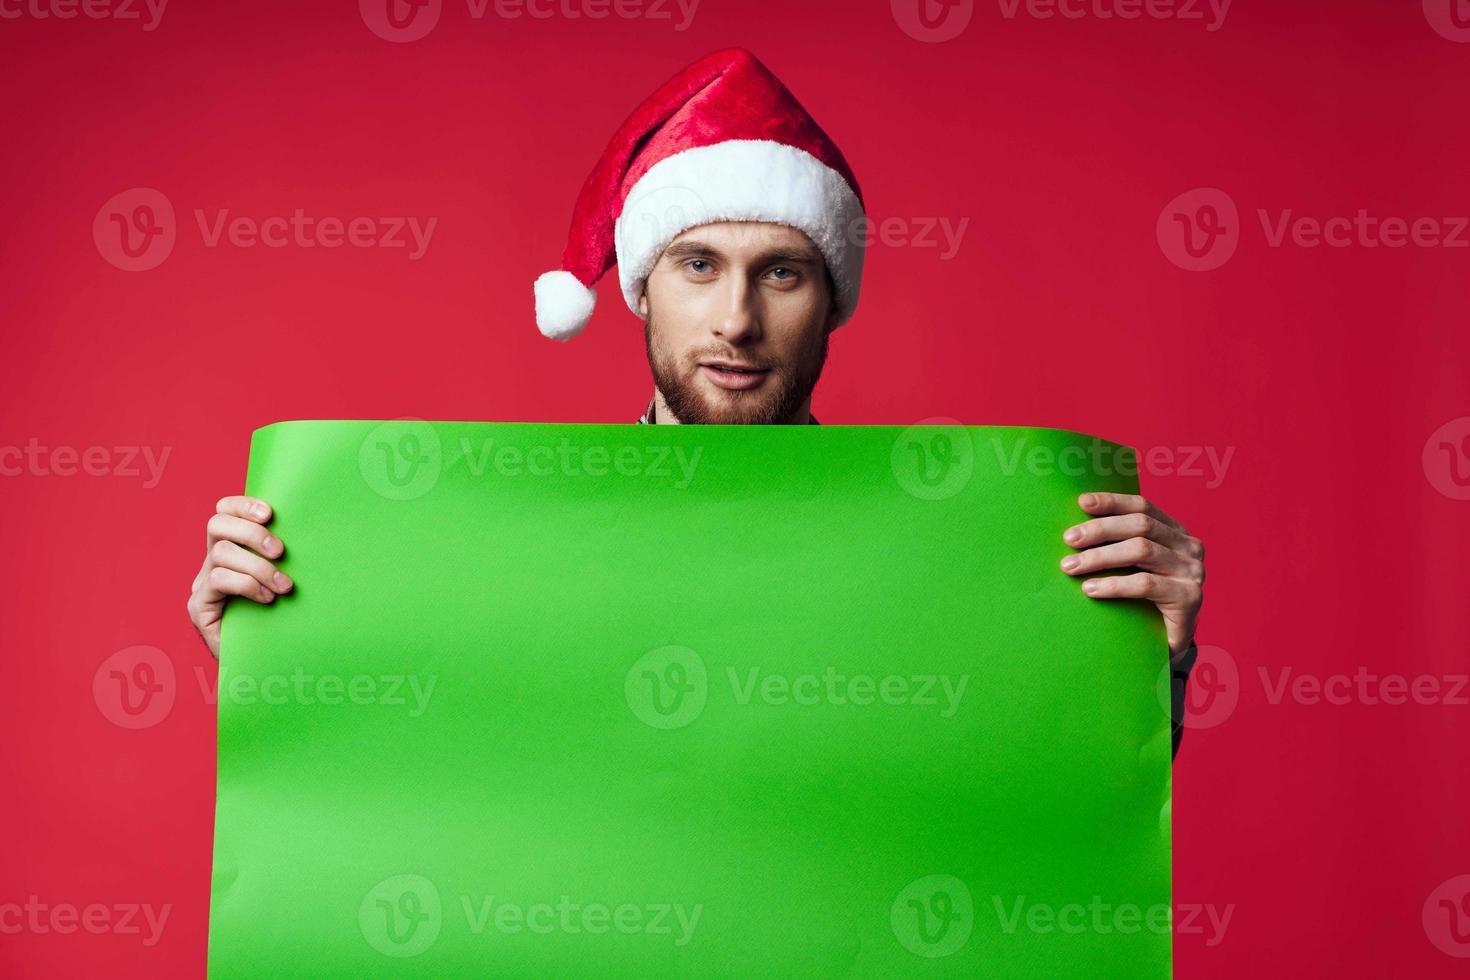 emotional man in a santa hat holding a banner holiday red background photo